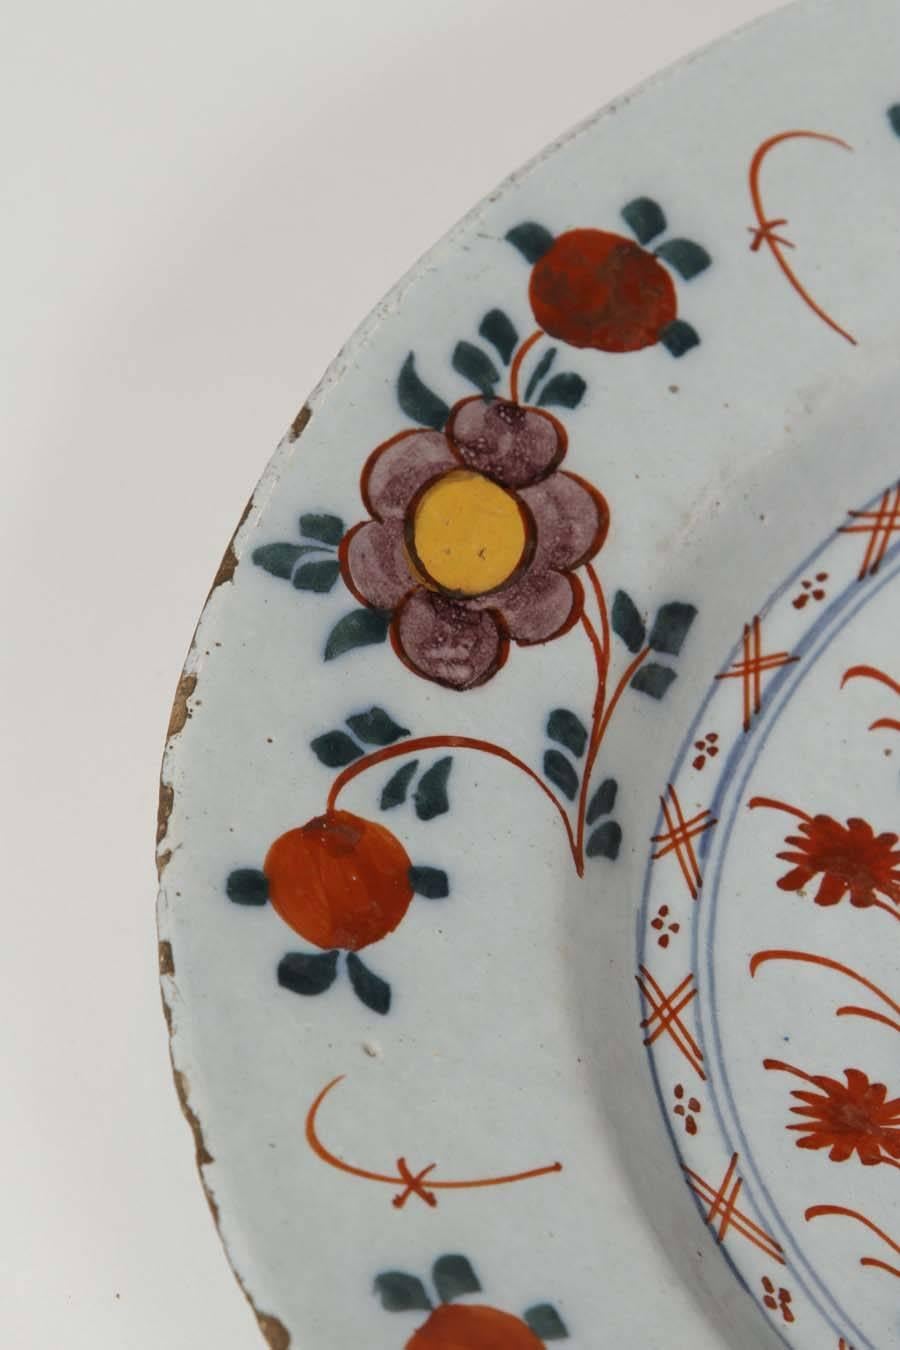 An 18th Century Dutch Delft Polychrome charger. The elements of the design are derived from Chinese porcelain, but the presentation is completely original.